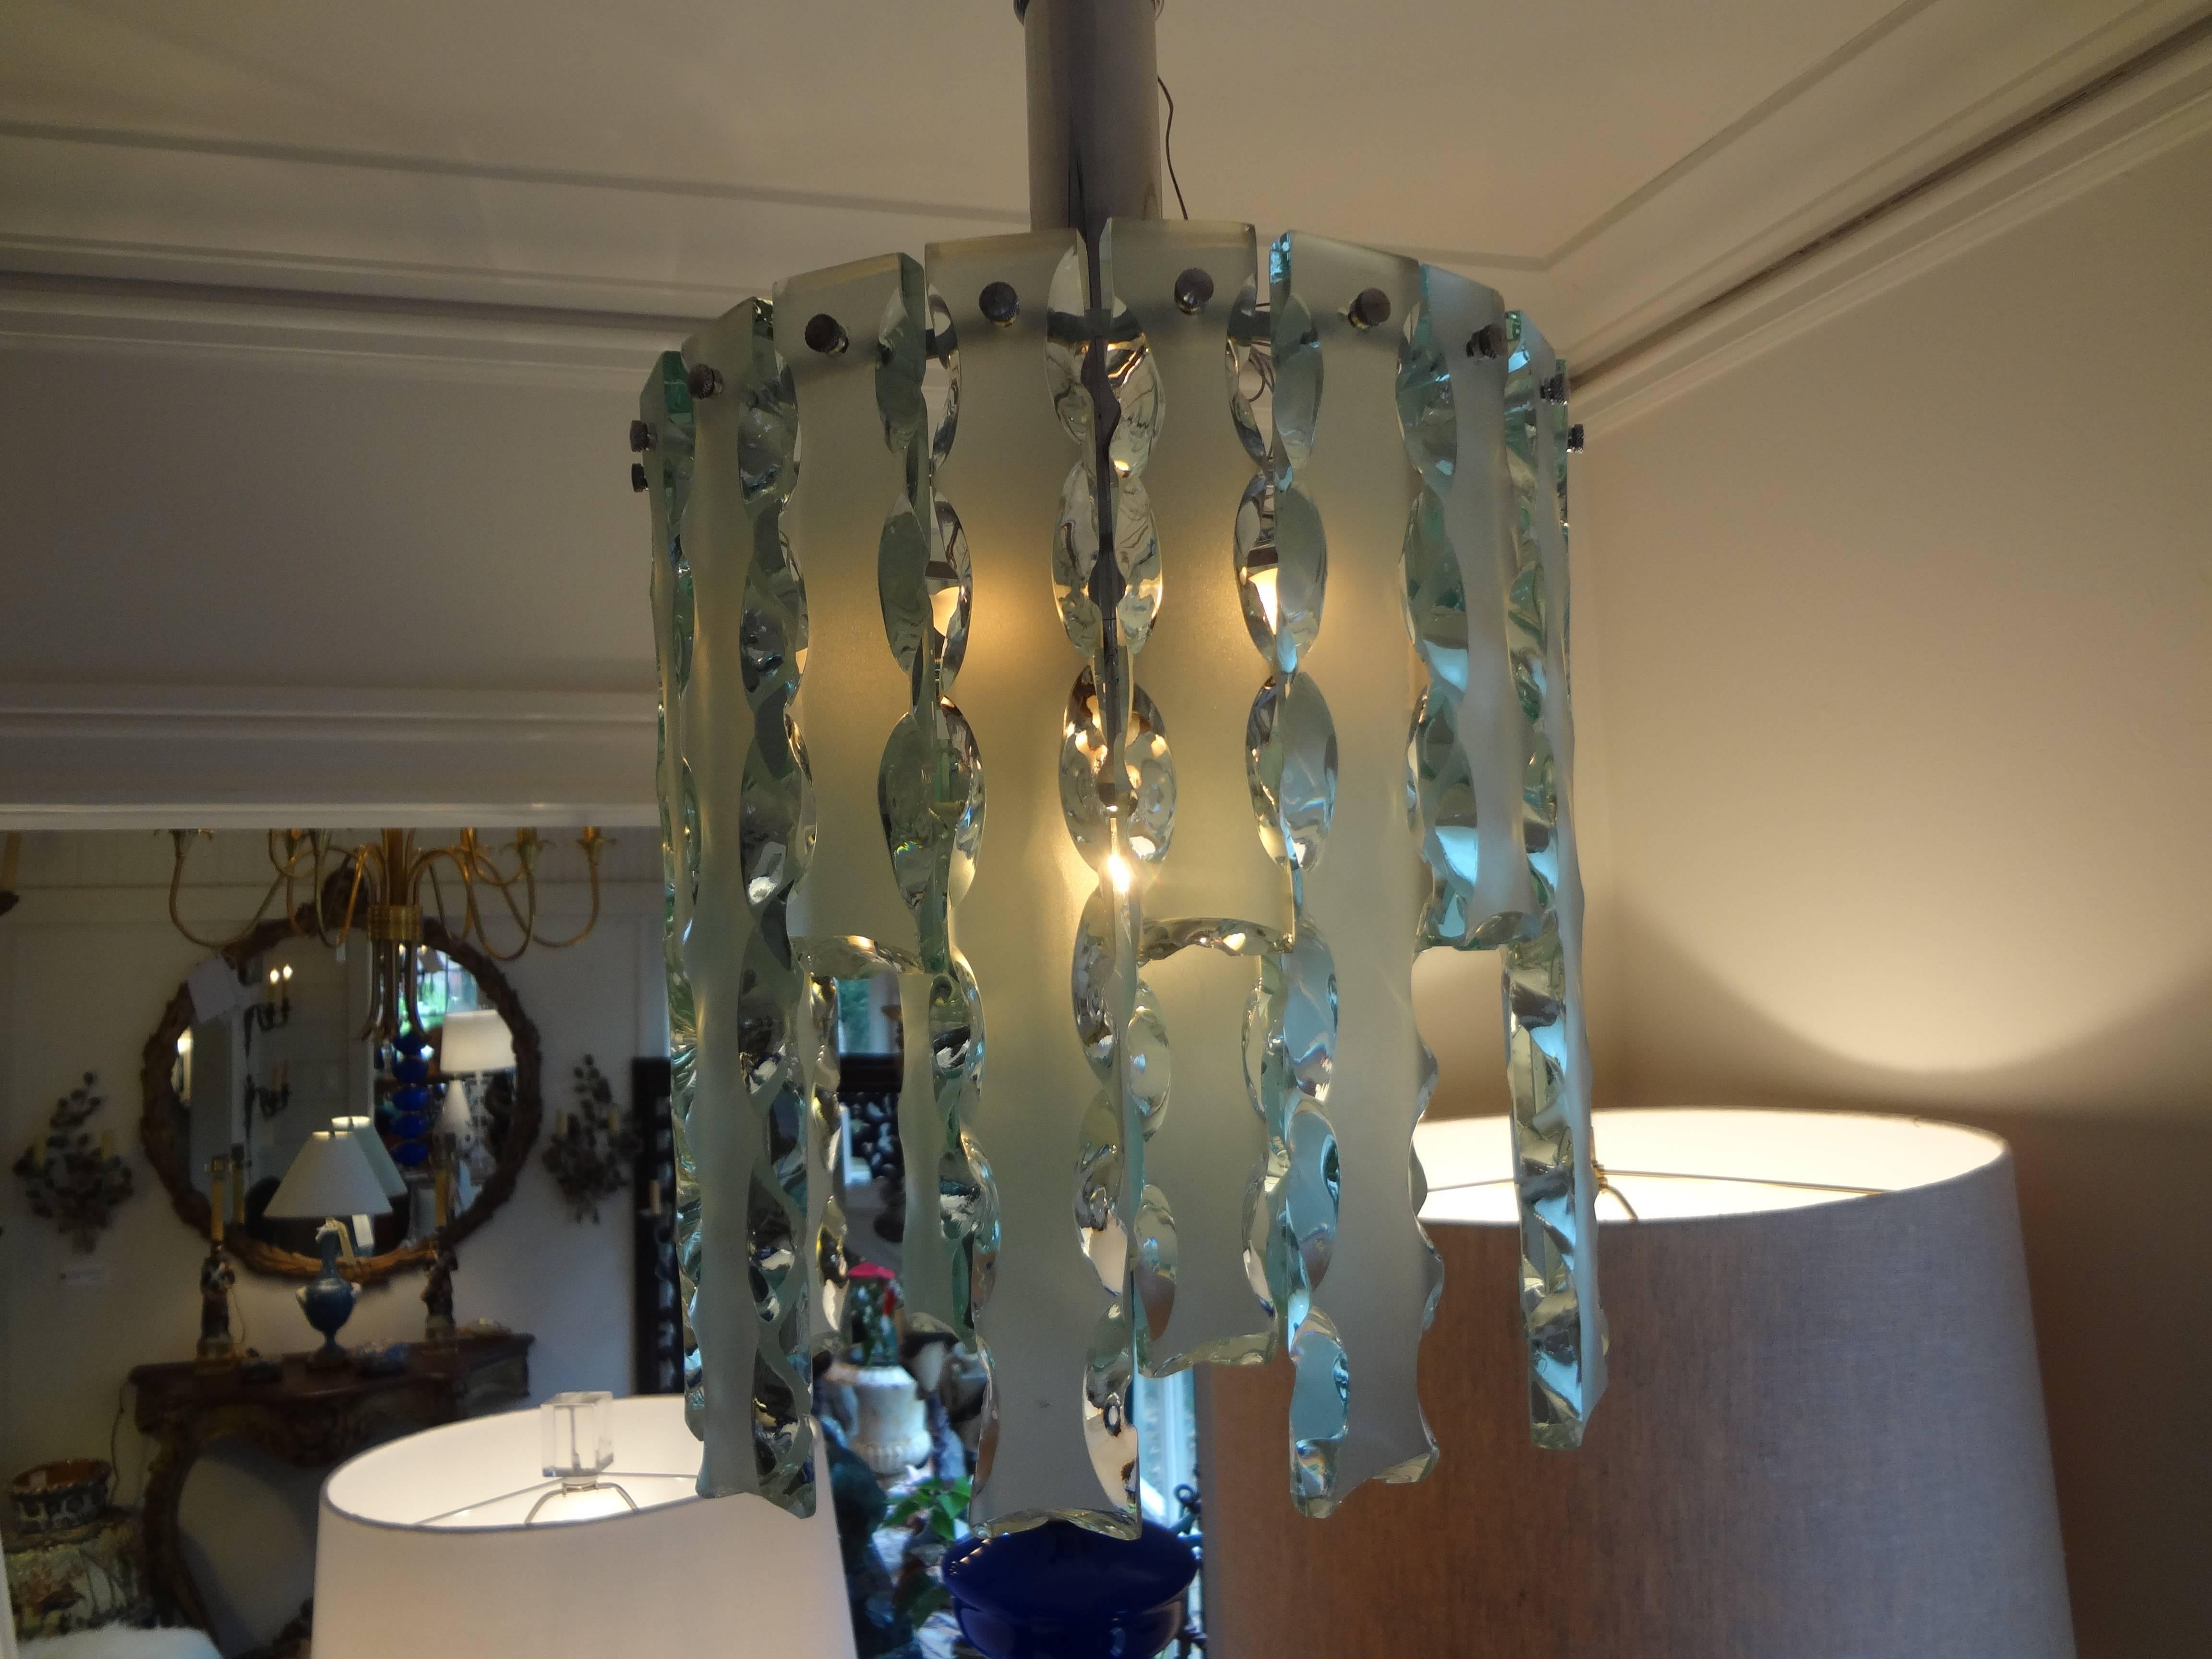 Italian Zero Quattro-Fontana Arte frosted glass chandelier.
Chic Italian Mid-Century Modern sandblasted chiselled glass lantern style chandelier or pendant with chrome structure. This Italian lantern style glass fixture was made by 04 (Zero